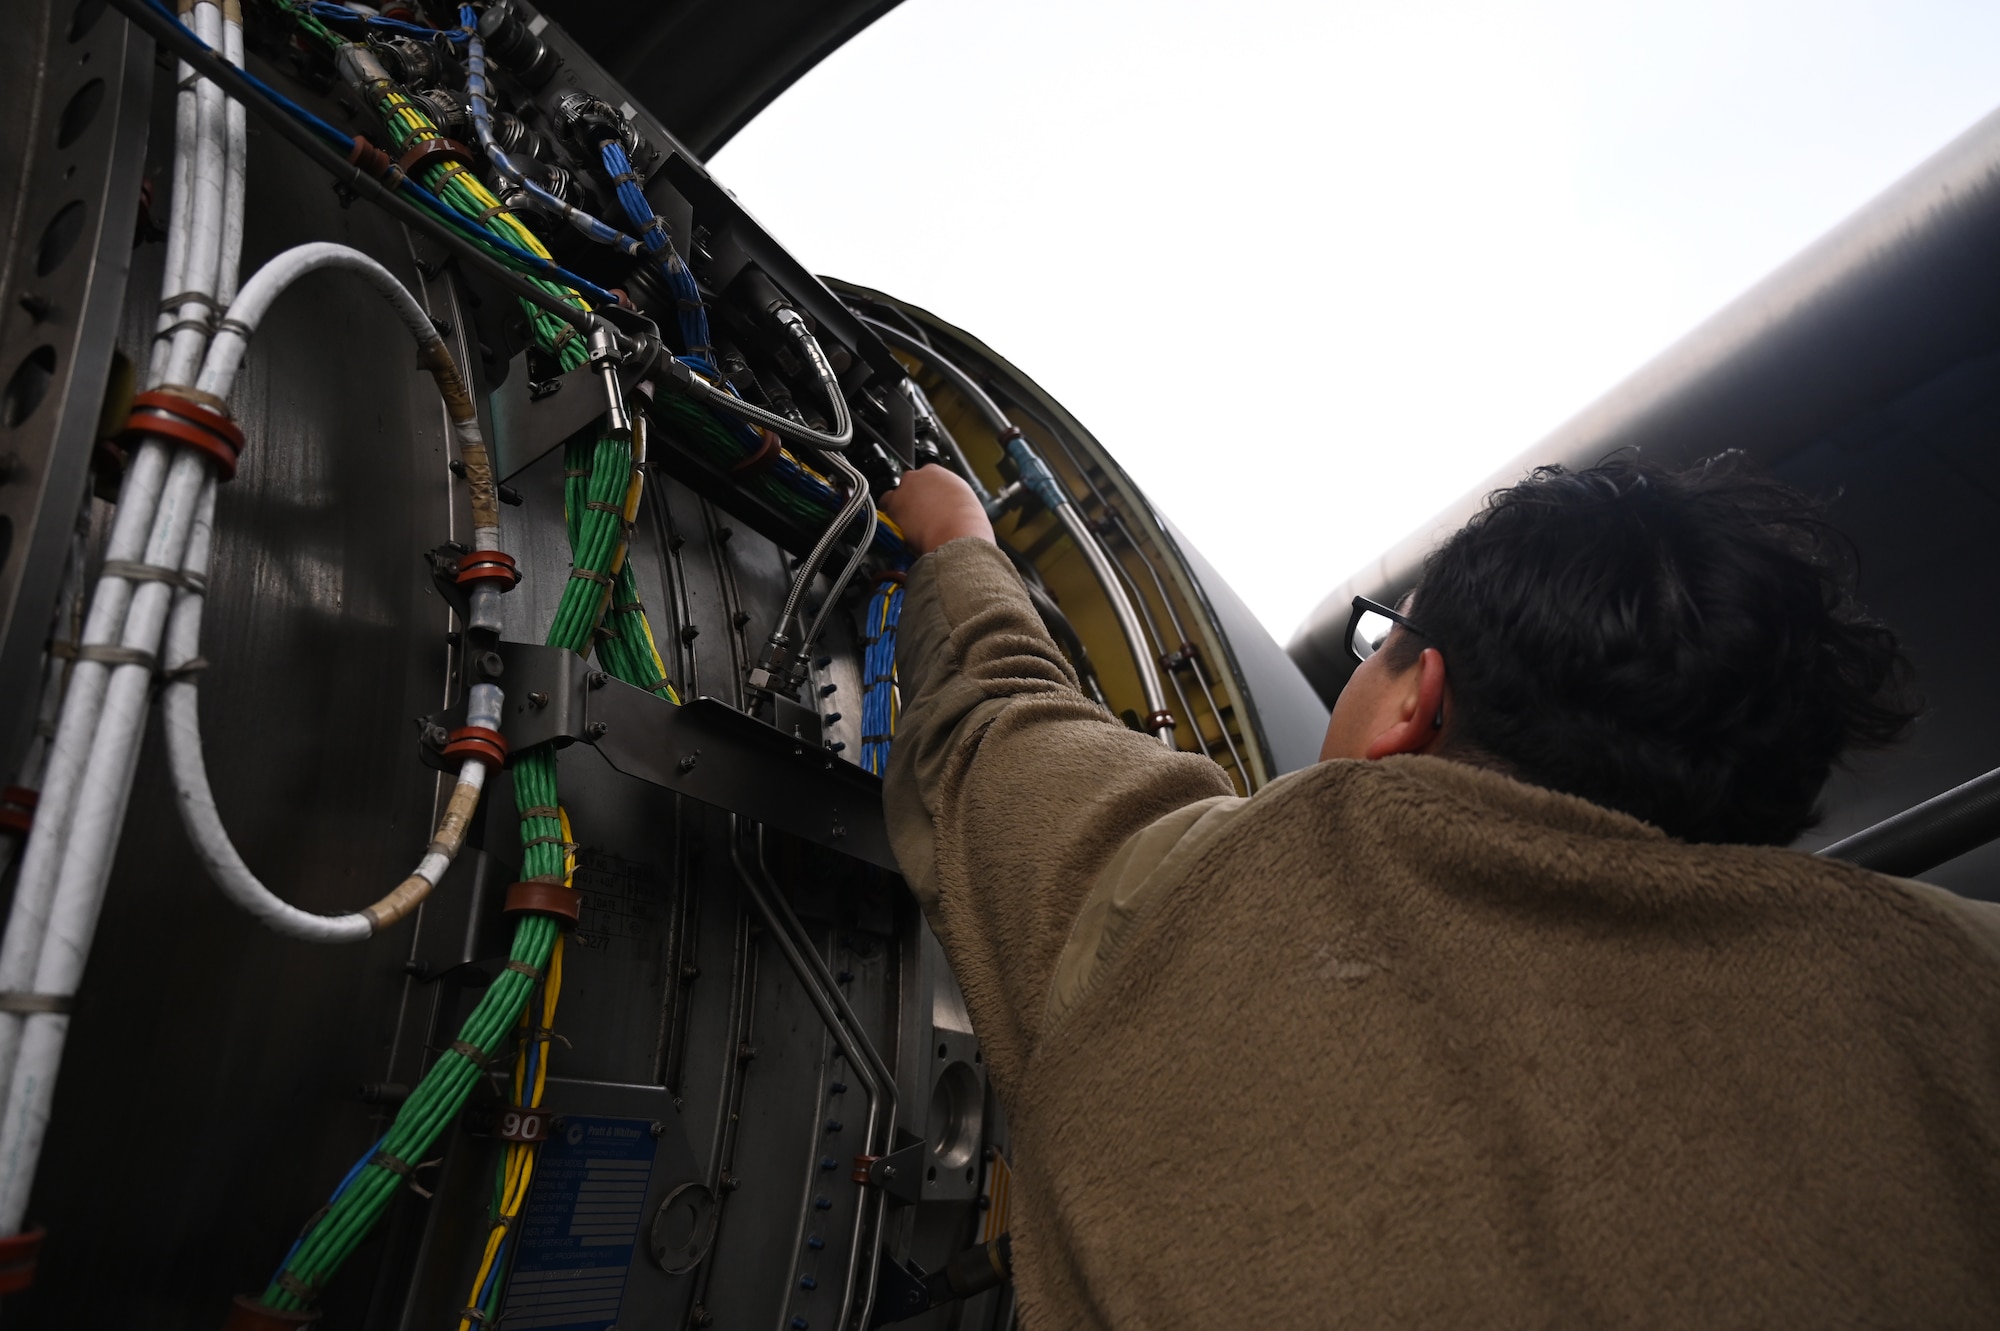 The 373rd TRS is only one of two C-17 Globemaster III training schools in the U.S. Air Force. The unit plays a vital role in producing expert maintainers for the Air force’s global airlift mission.